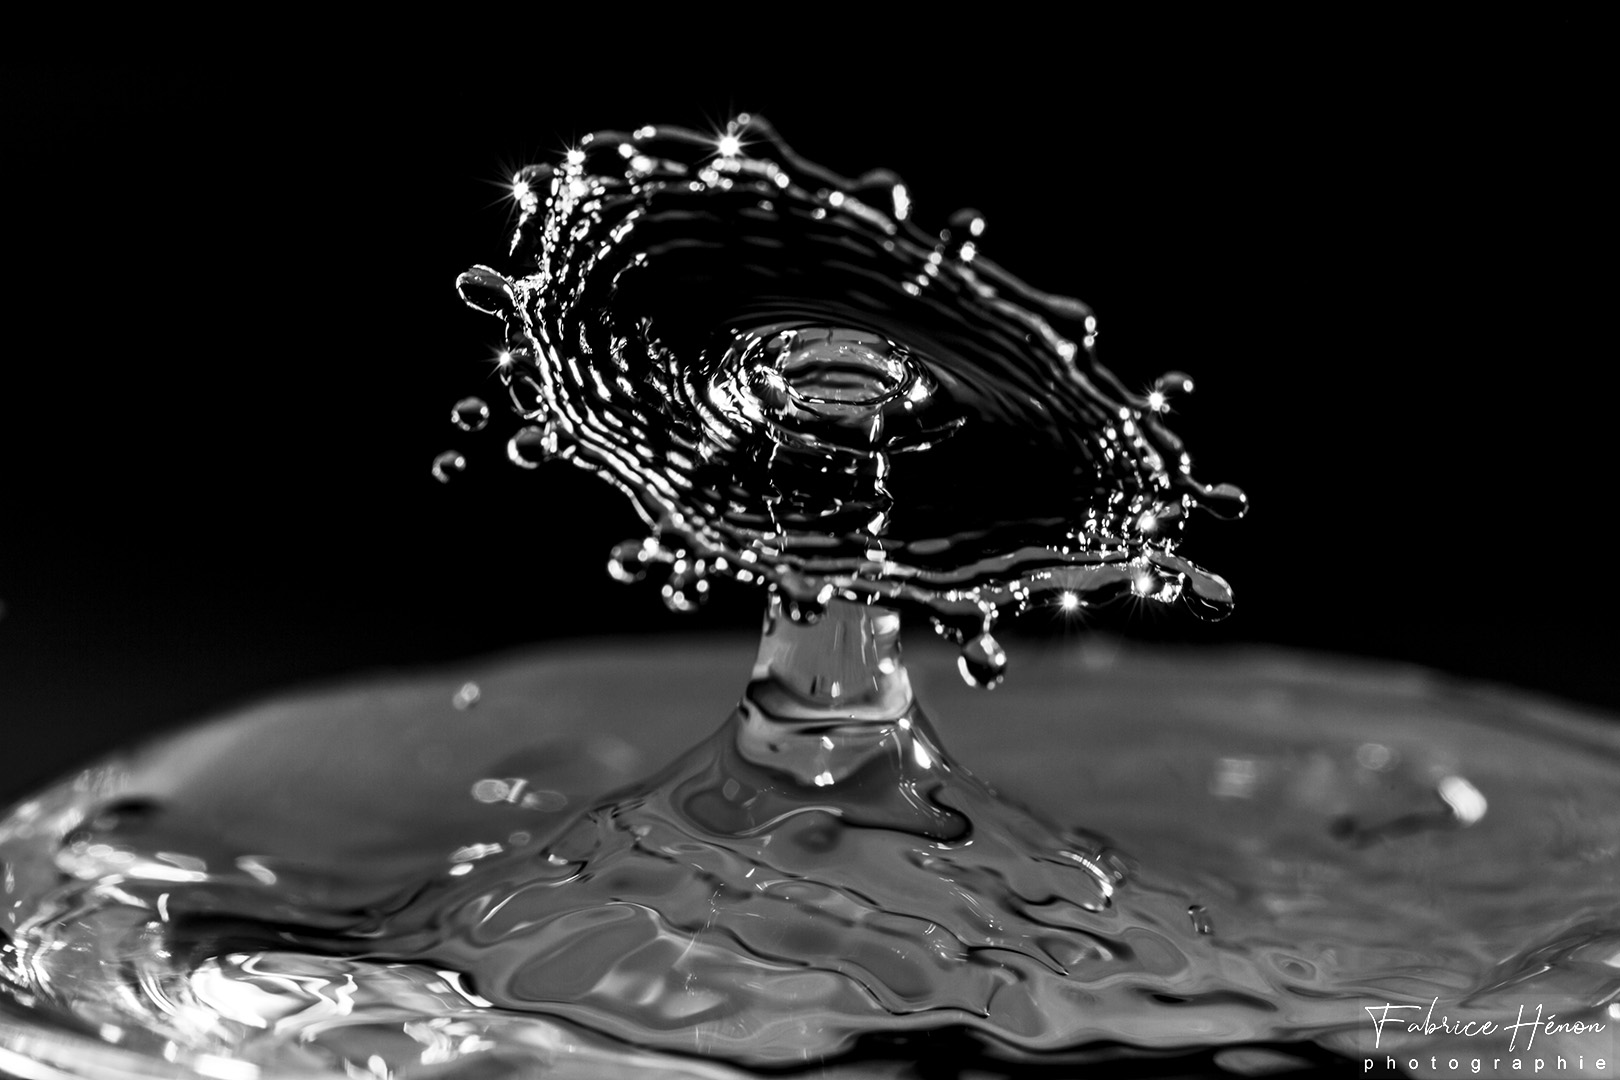 Droplet collision